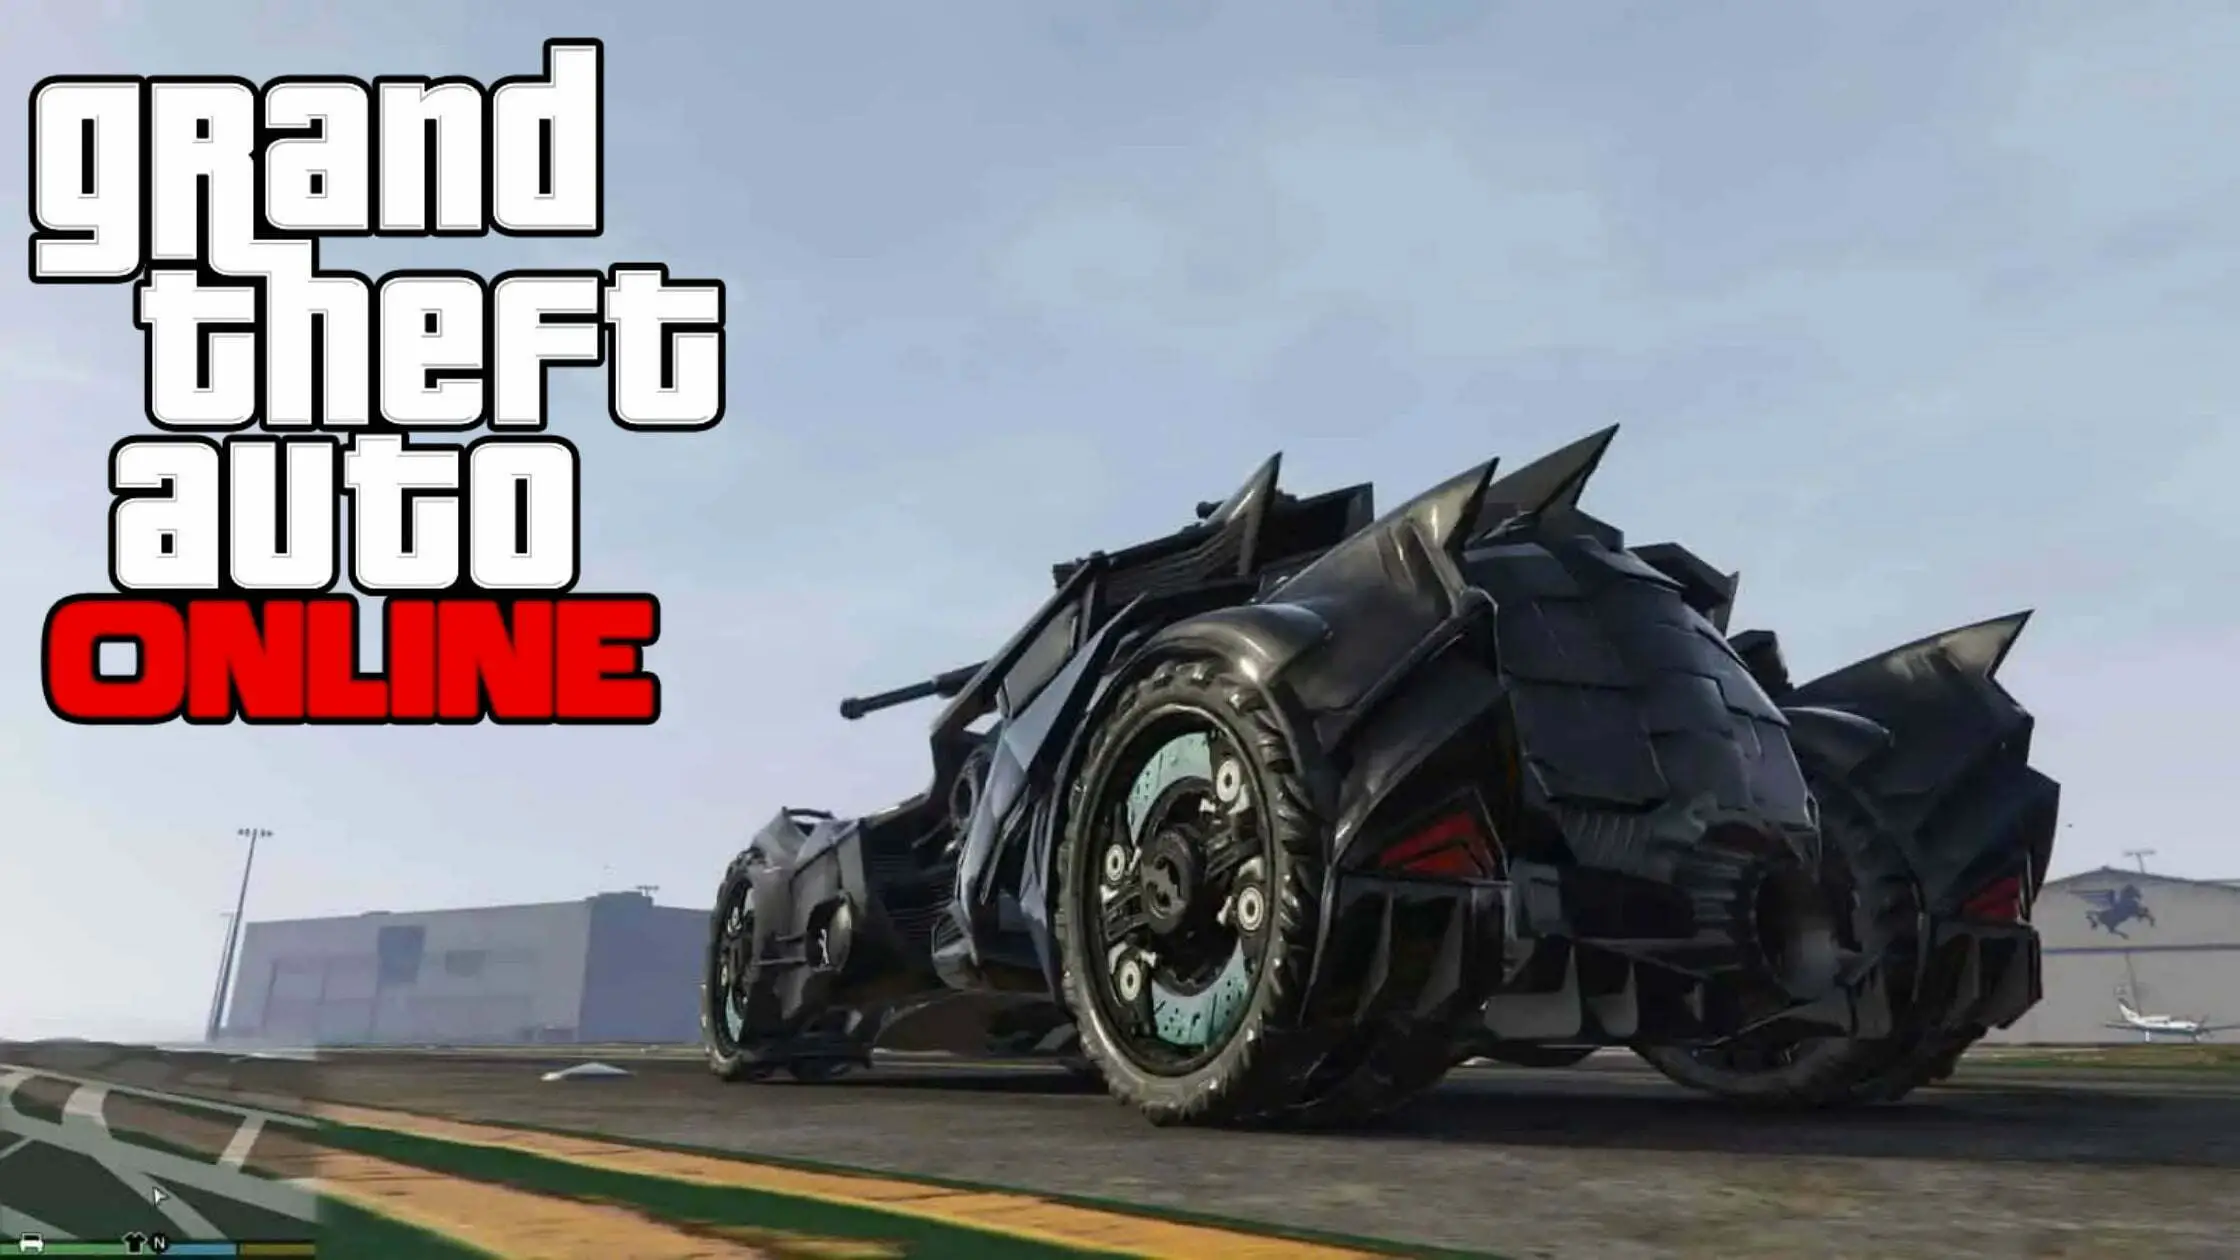 Top 5 most expensive cars in GTA Online - Batmobile and many more